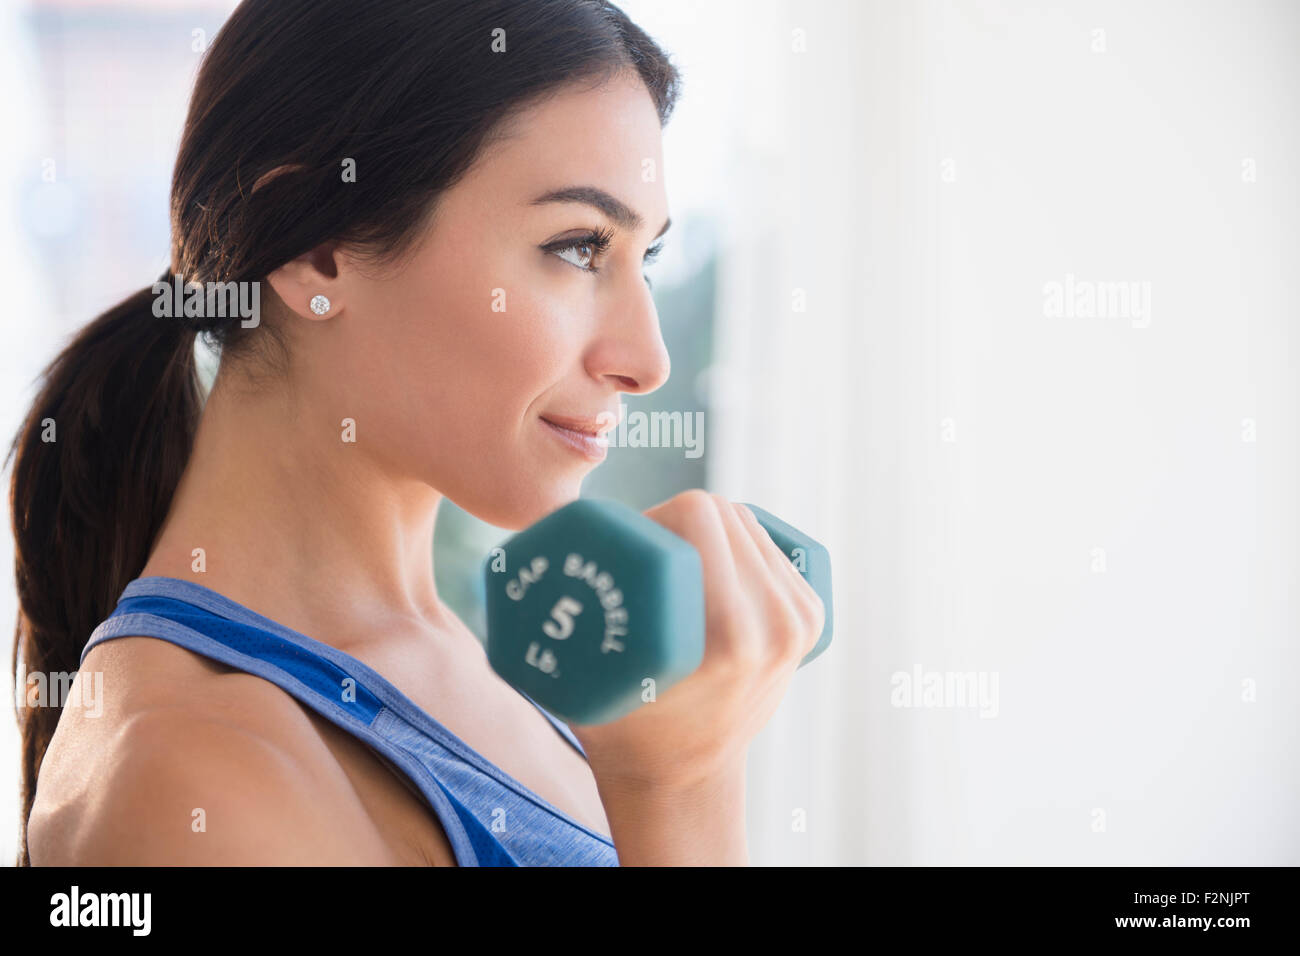 Woman lifting weights Stock Photo